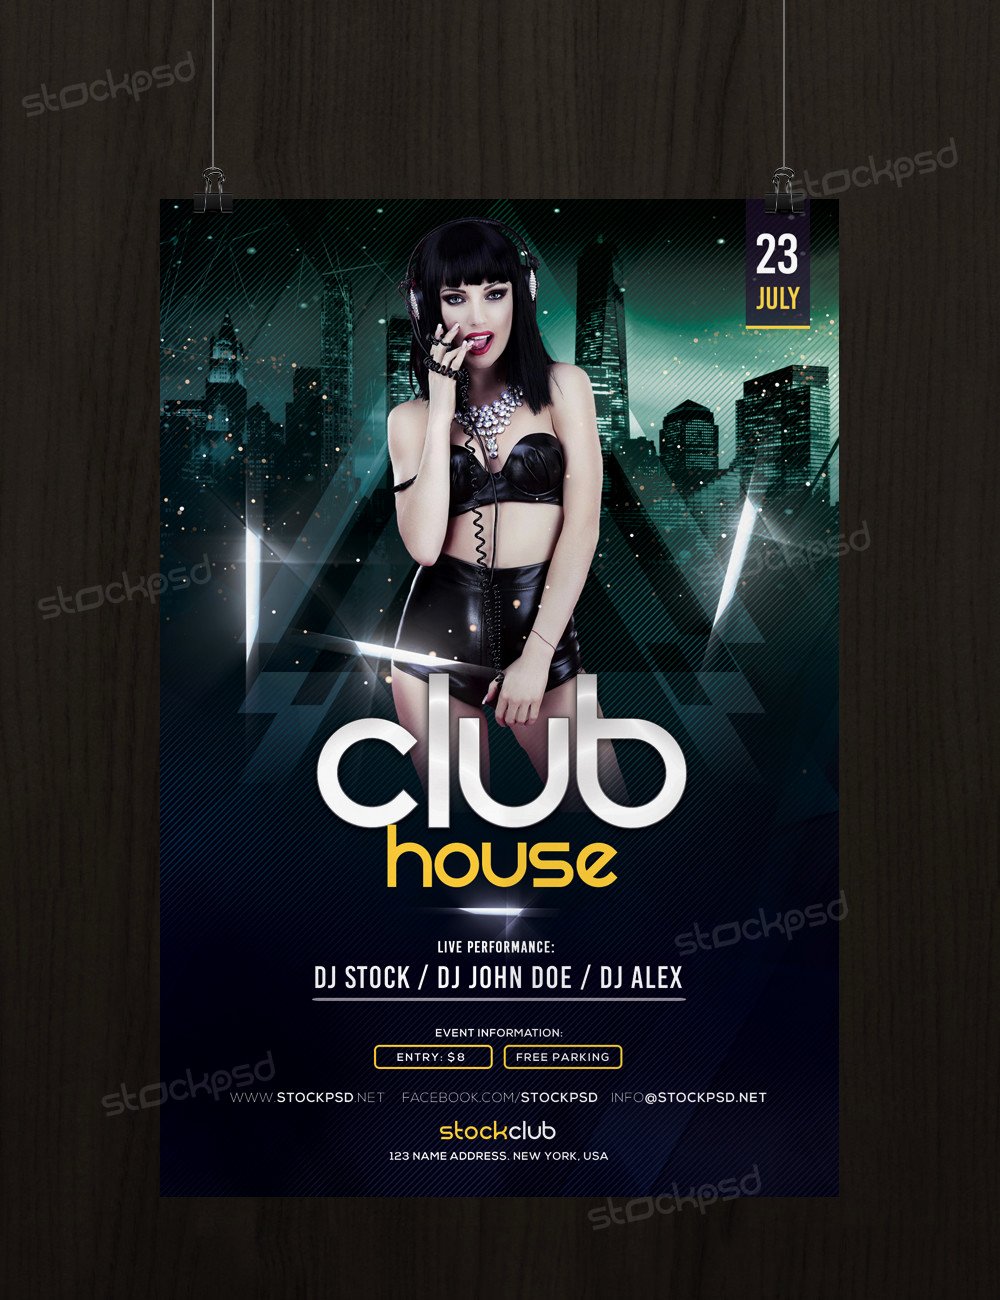 Club House Download Free Psd Flyer Template Stockpsd